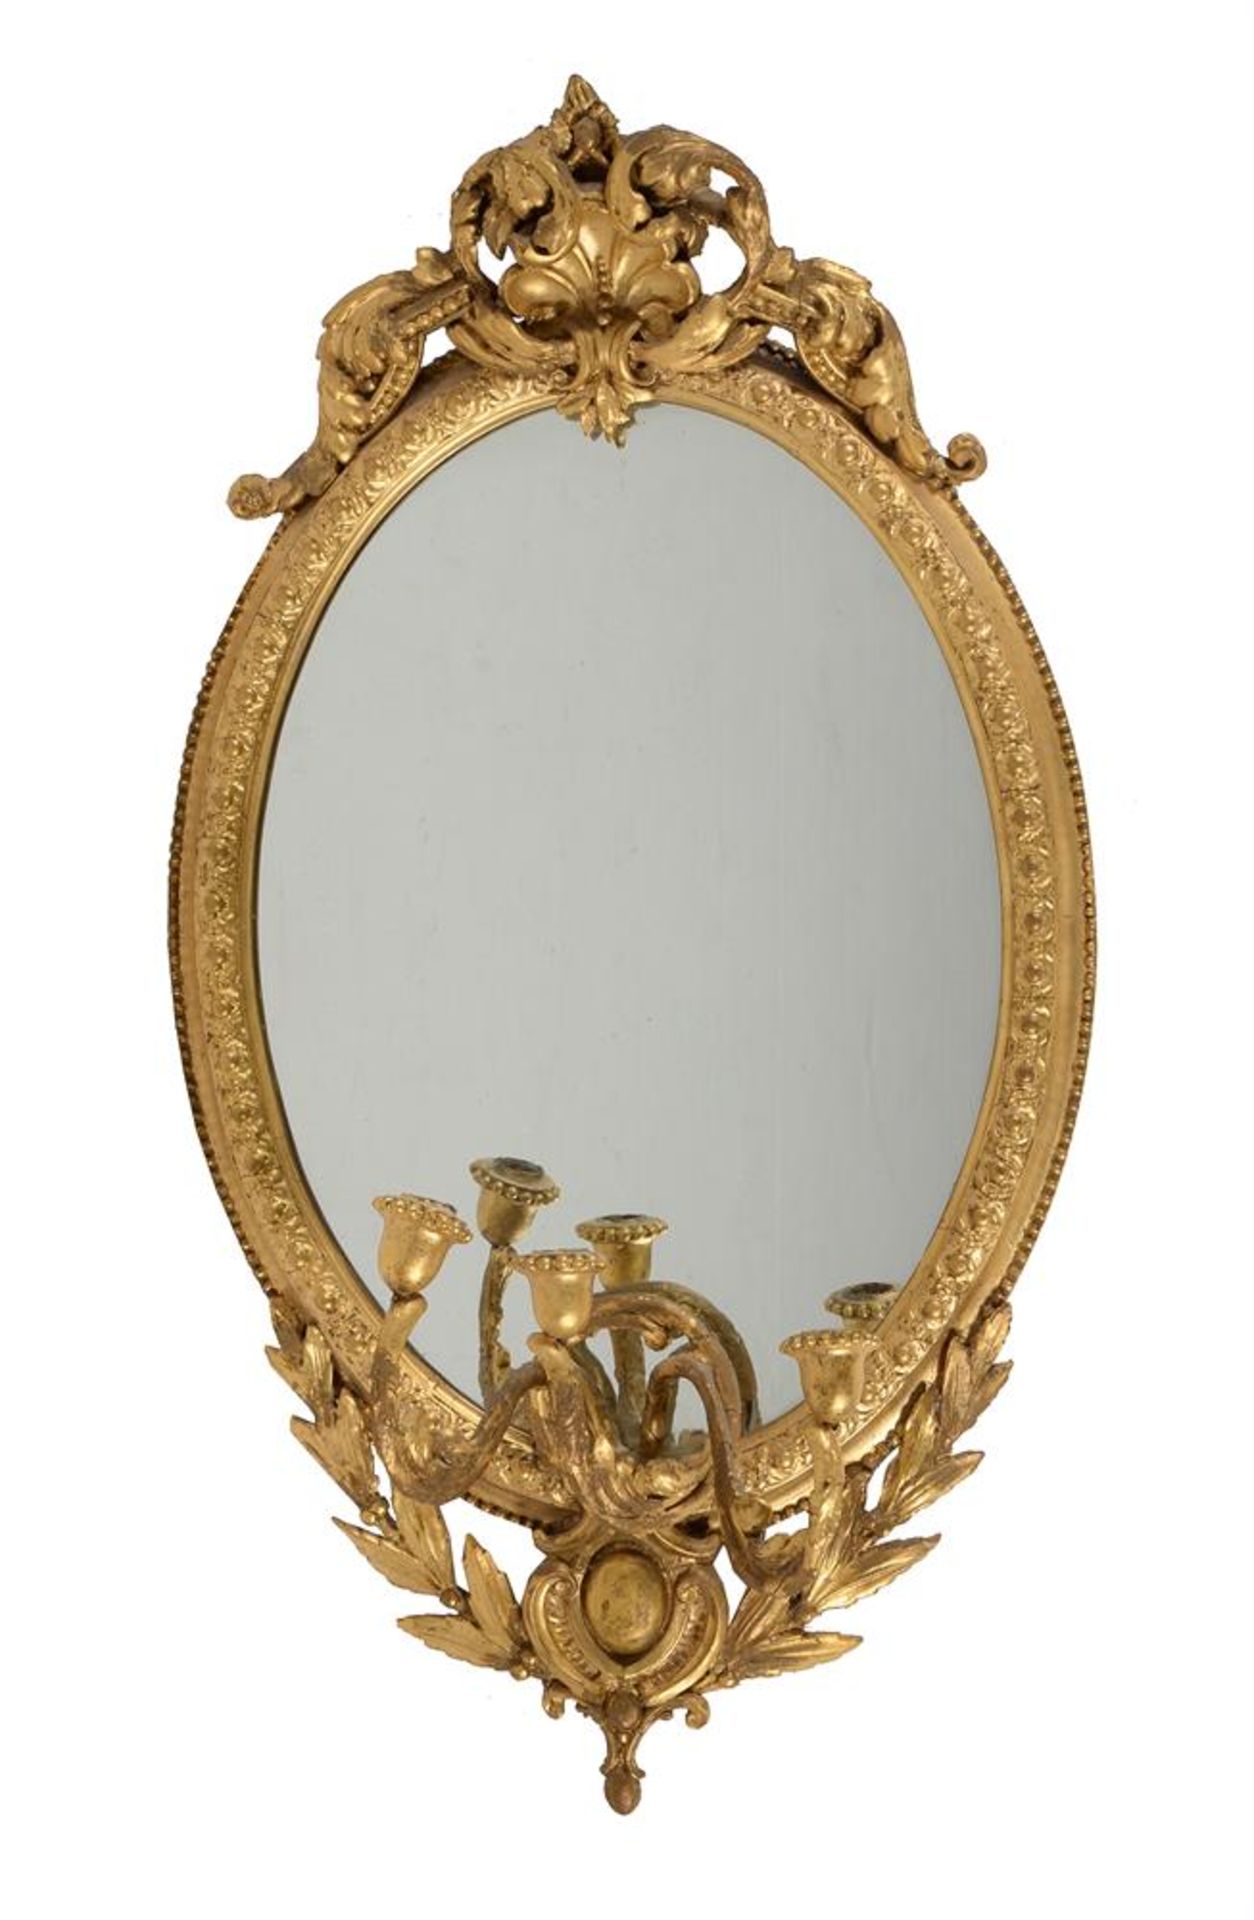 A pair of Victorian giltwood and composition girandole oval wall mirrors with three candle branches - Image 2 of 2